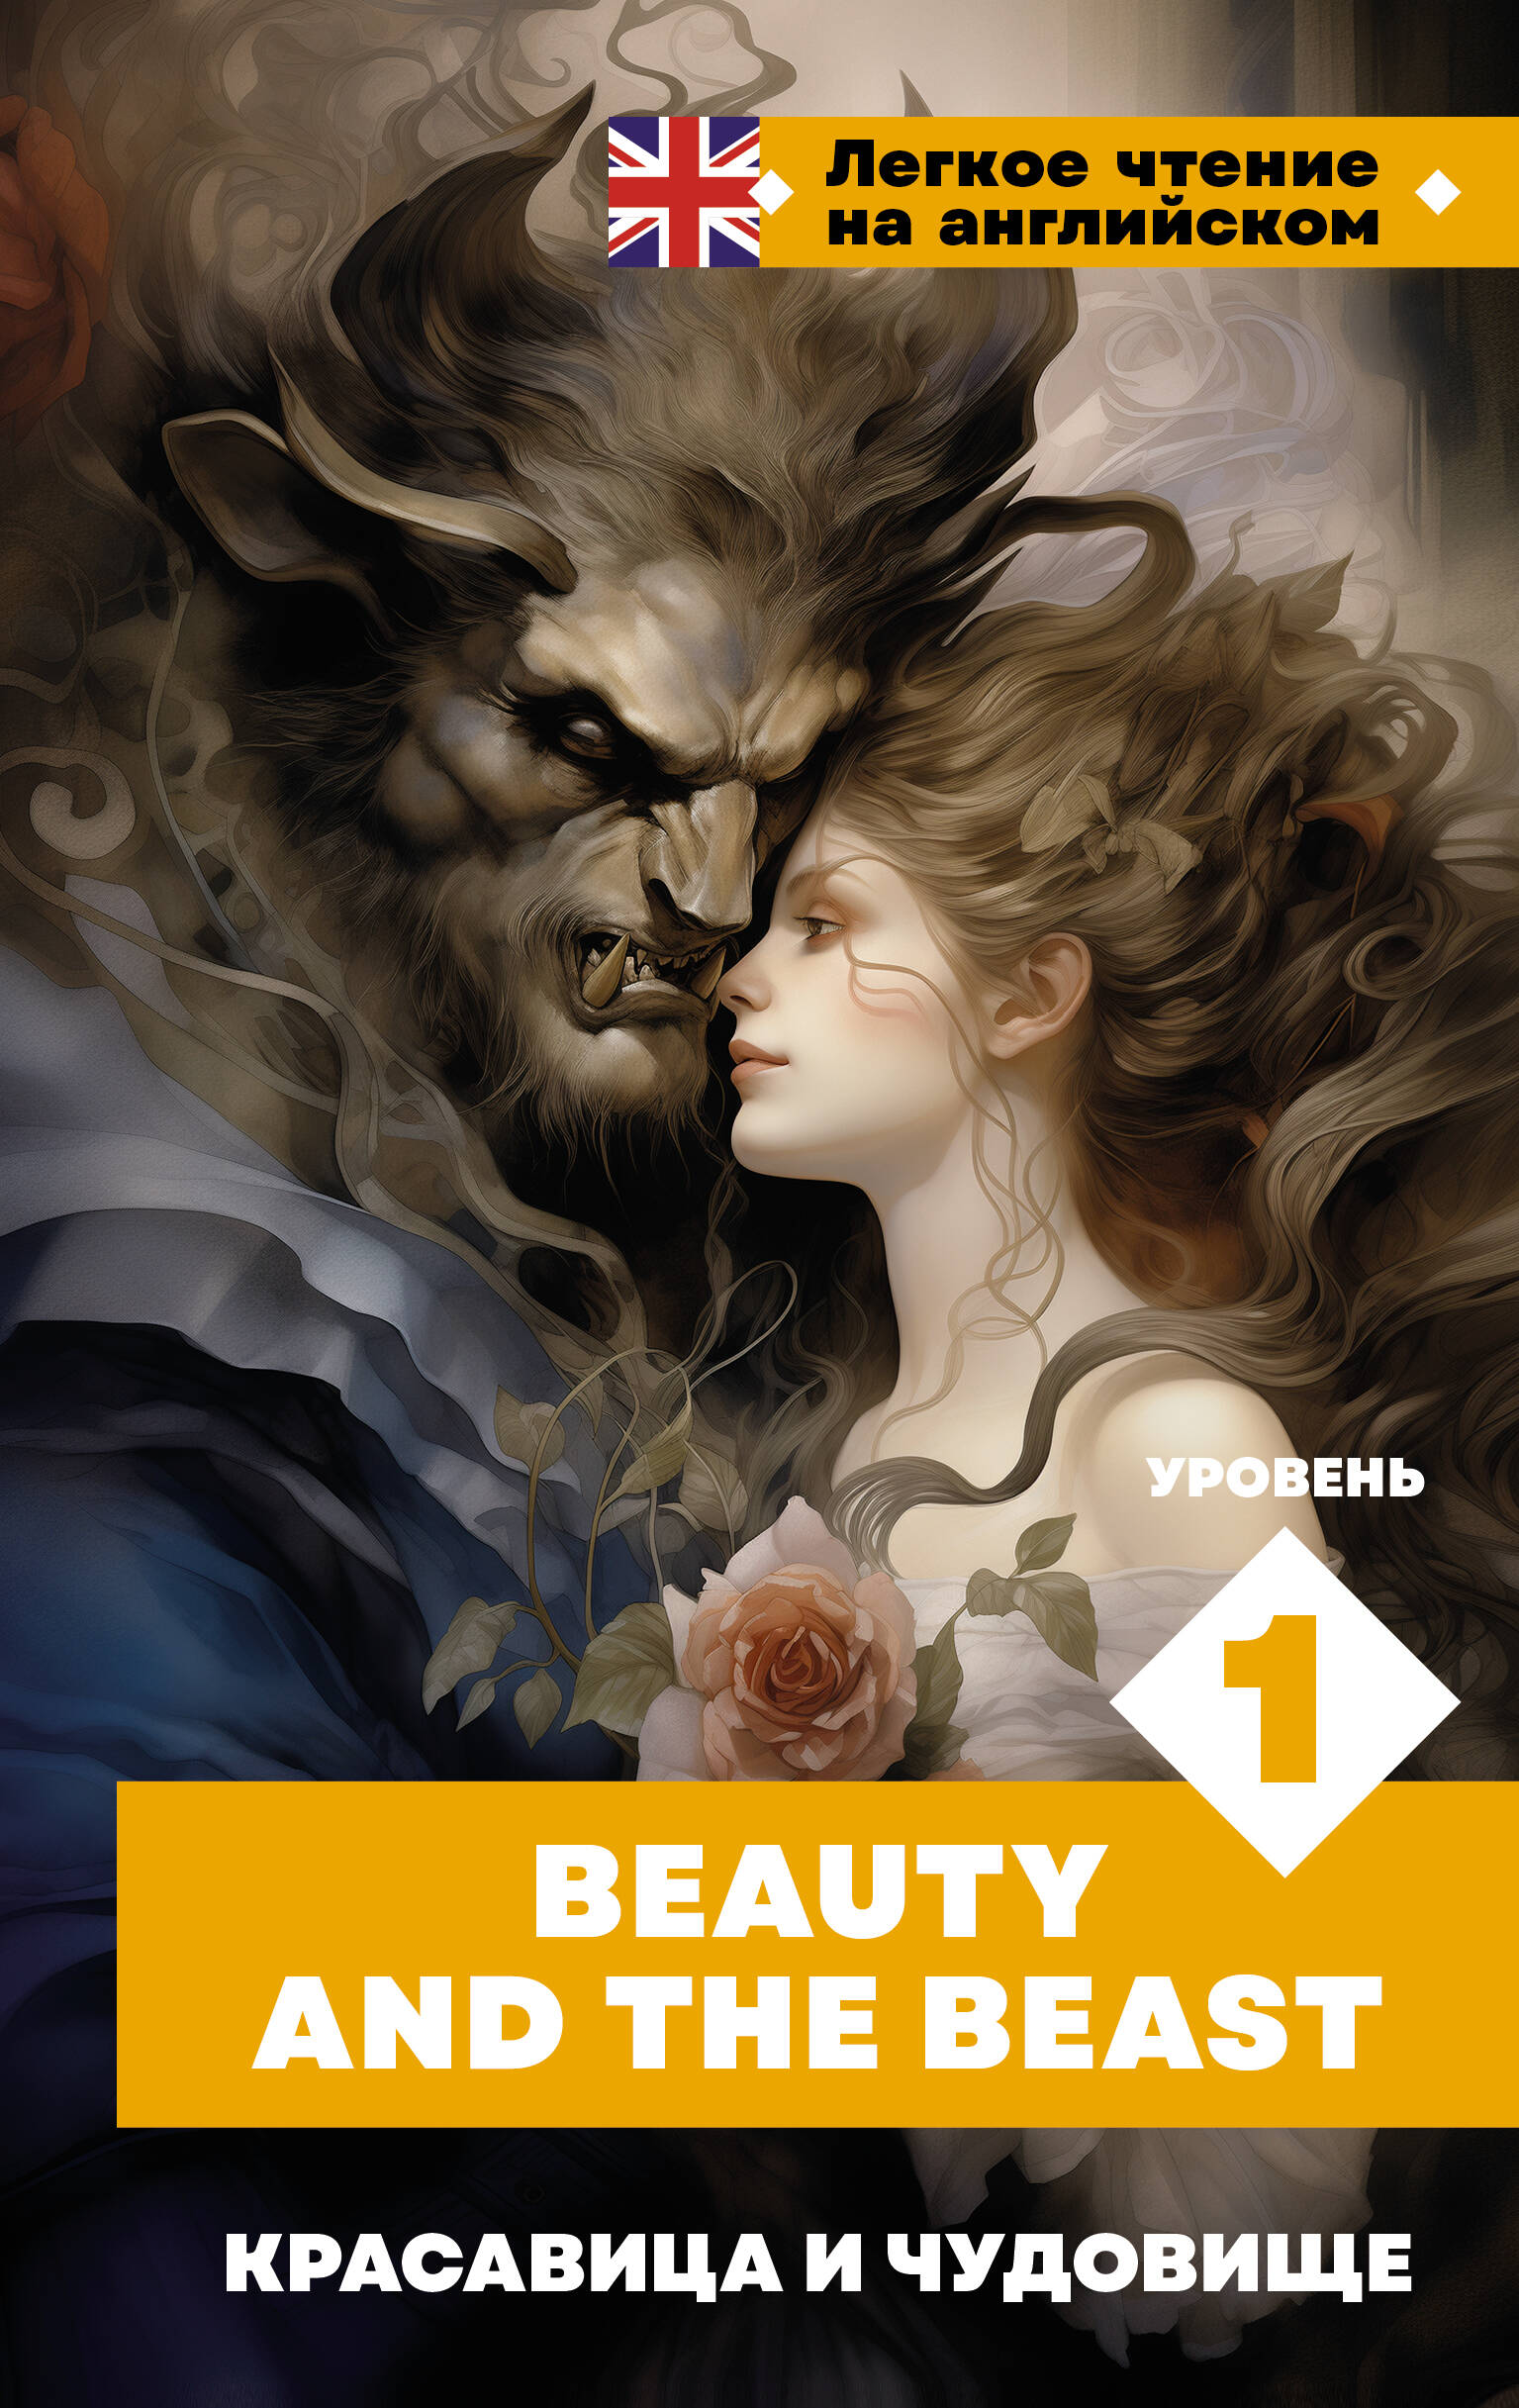   .  1 = Beauty and the Beast